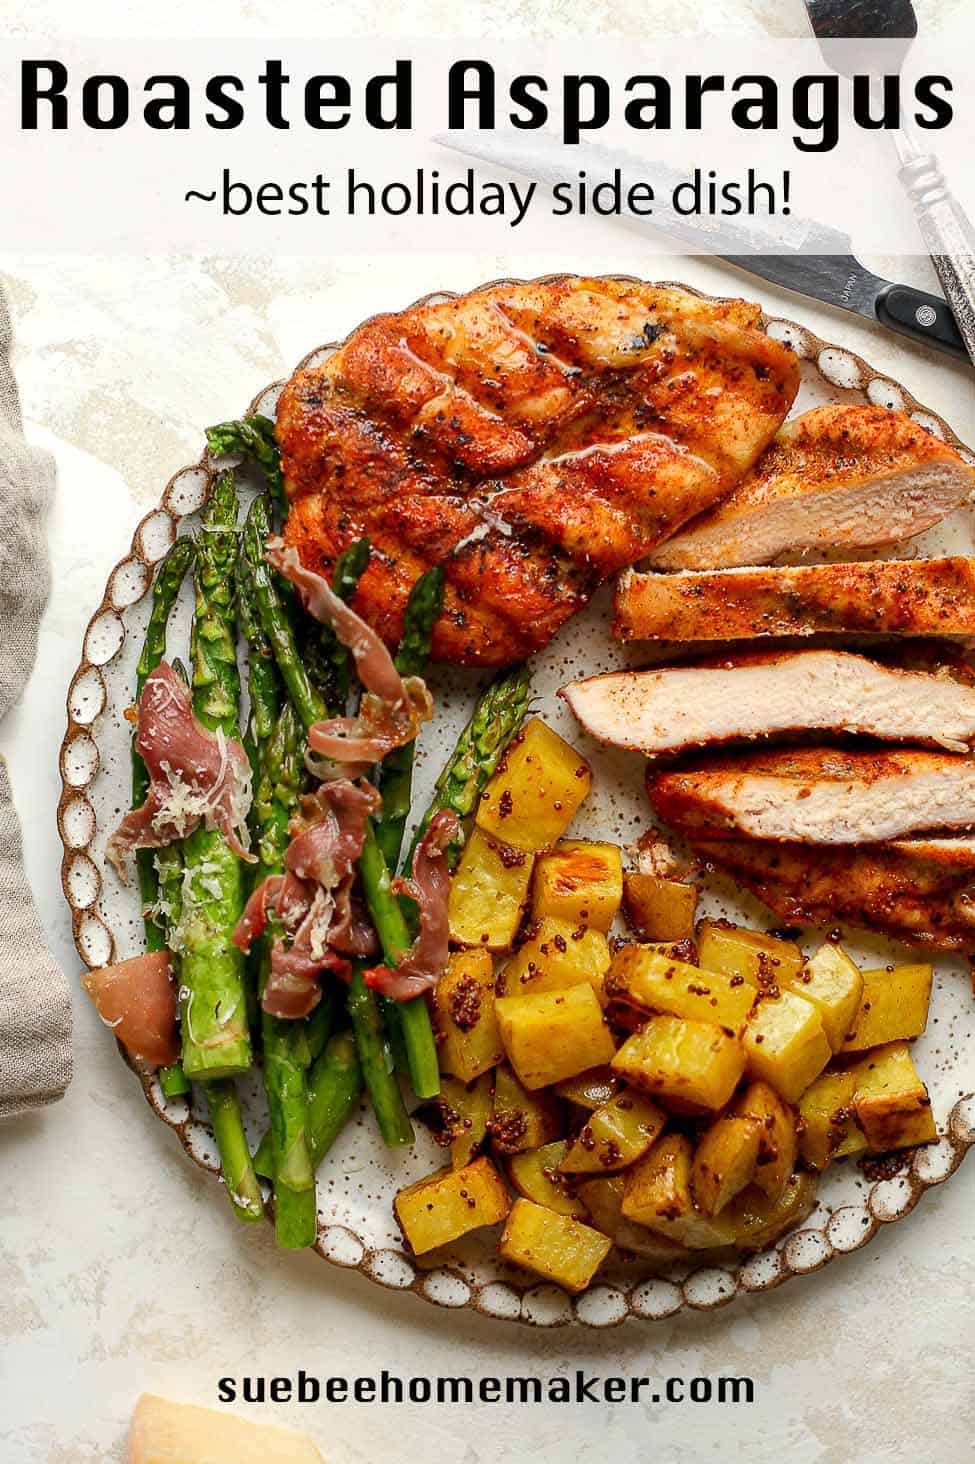 A plate of smoked chicken, roasted asparagus, and mustard potatoes.